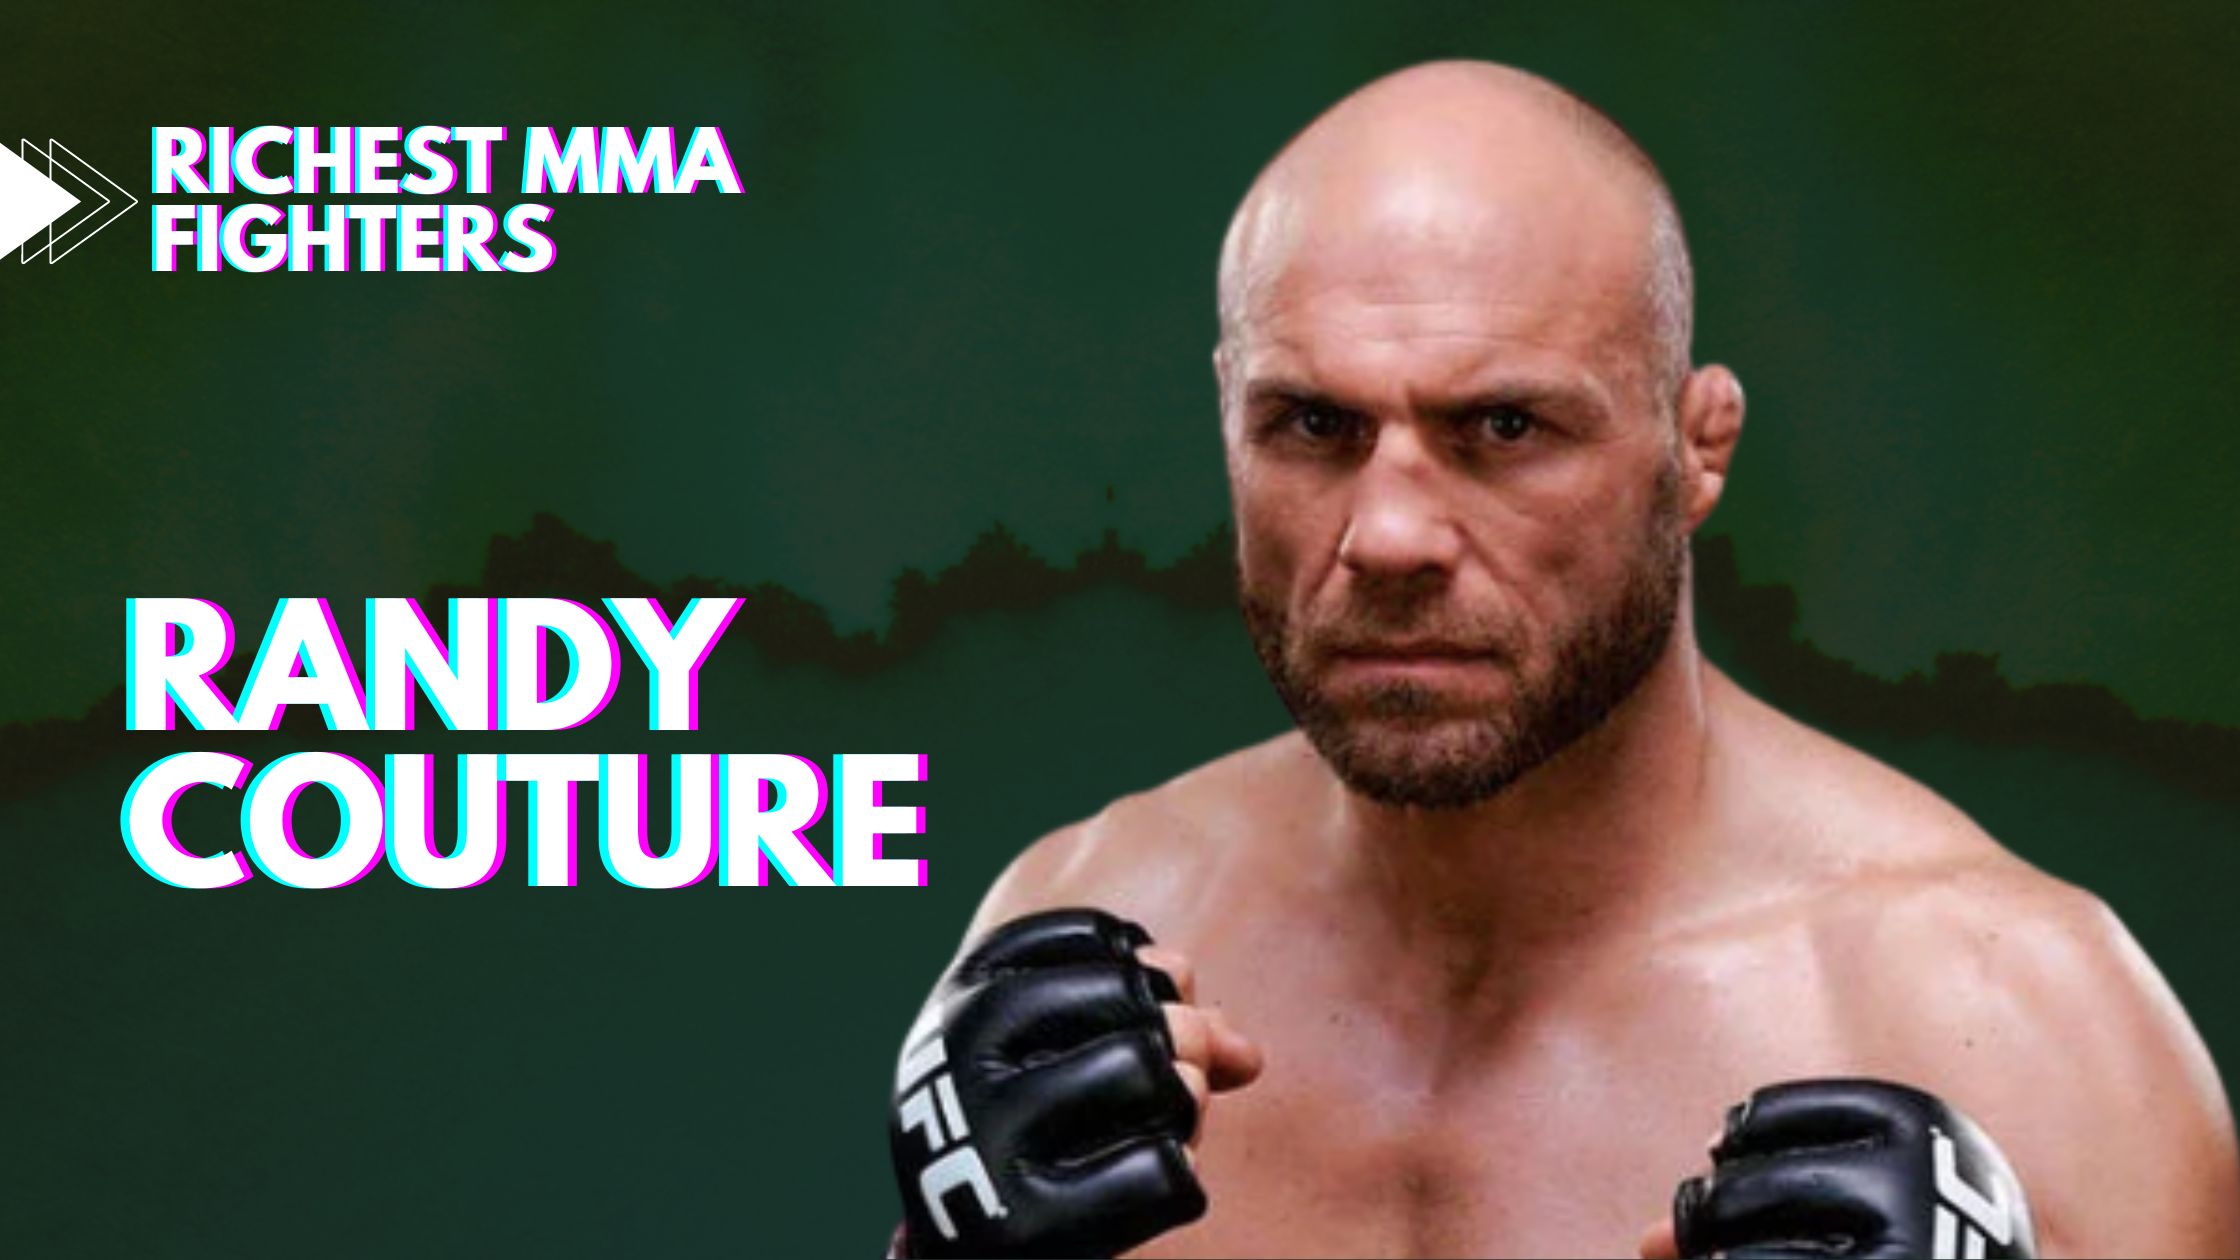 Randy Couture - Richest MMA fighters